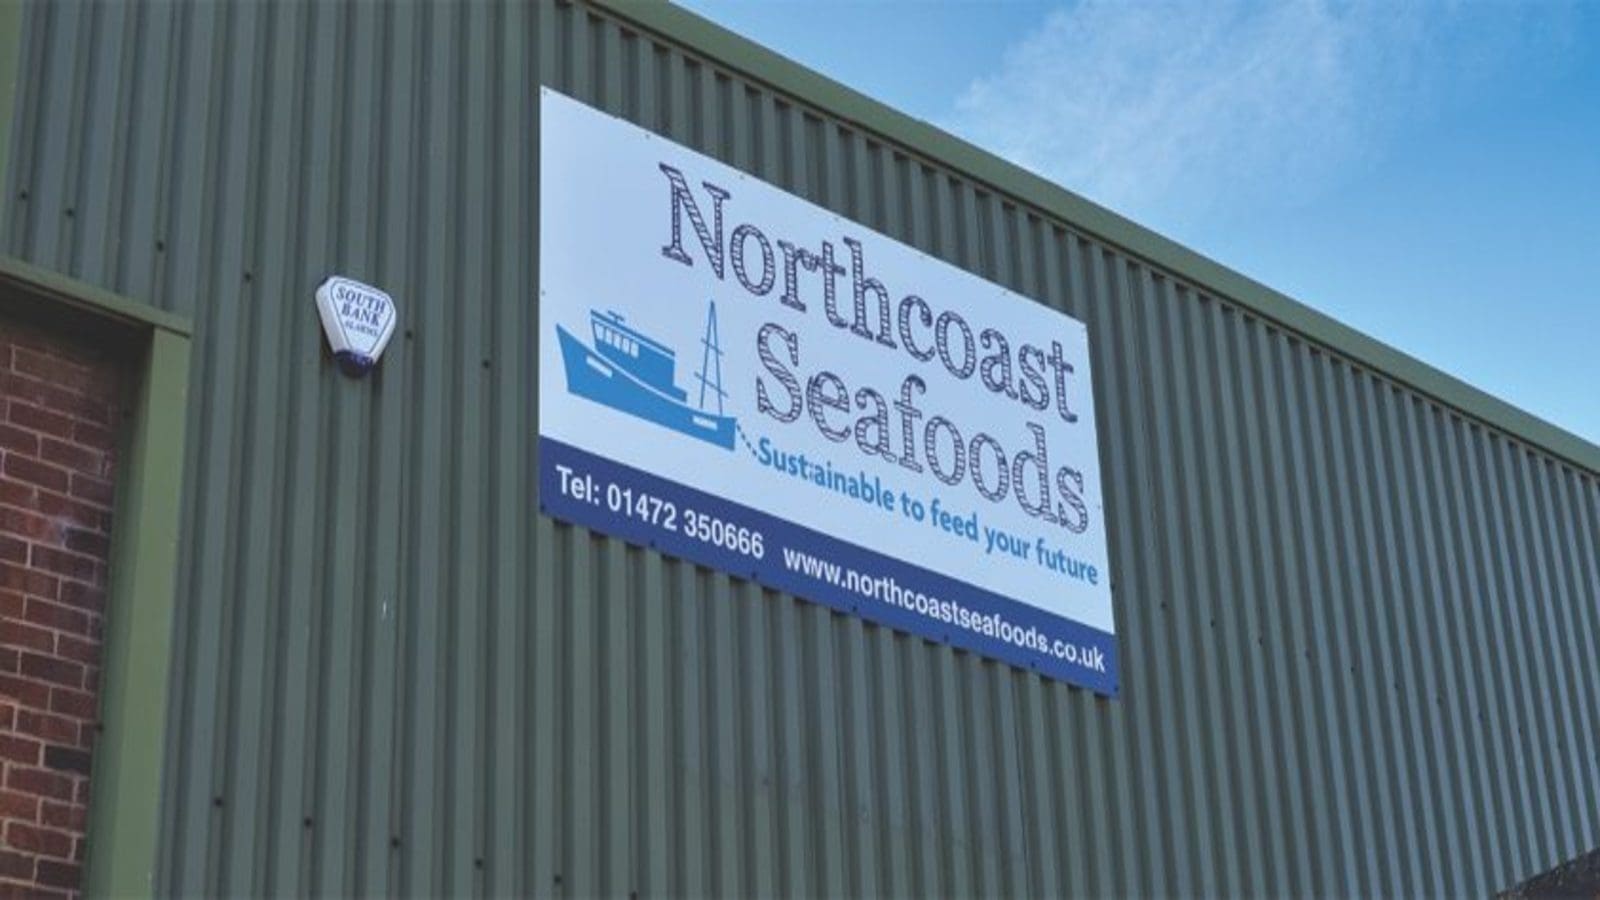 Japanese food processing giant expands European presence with acquisition of UK’s Northcoast Seafoods